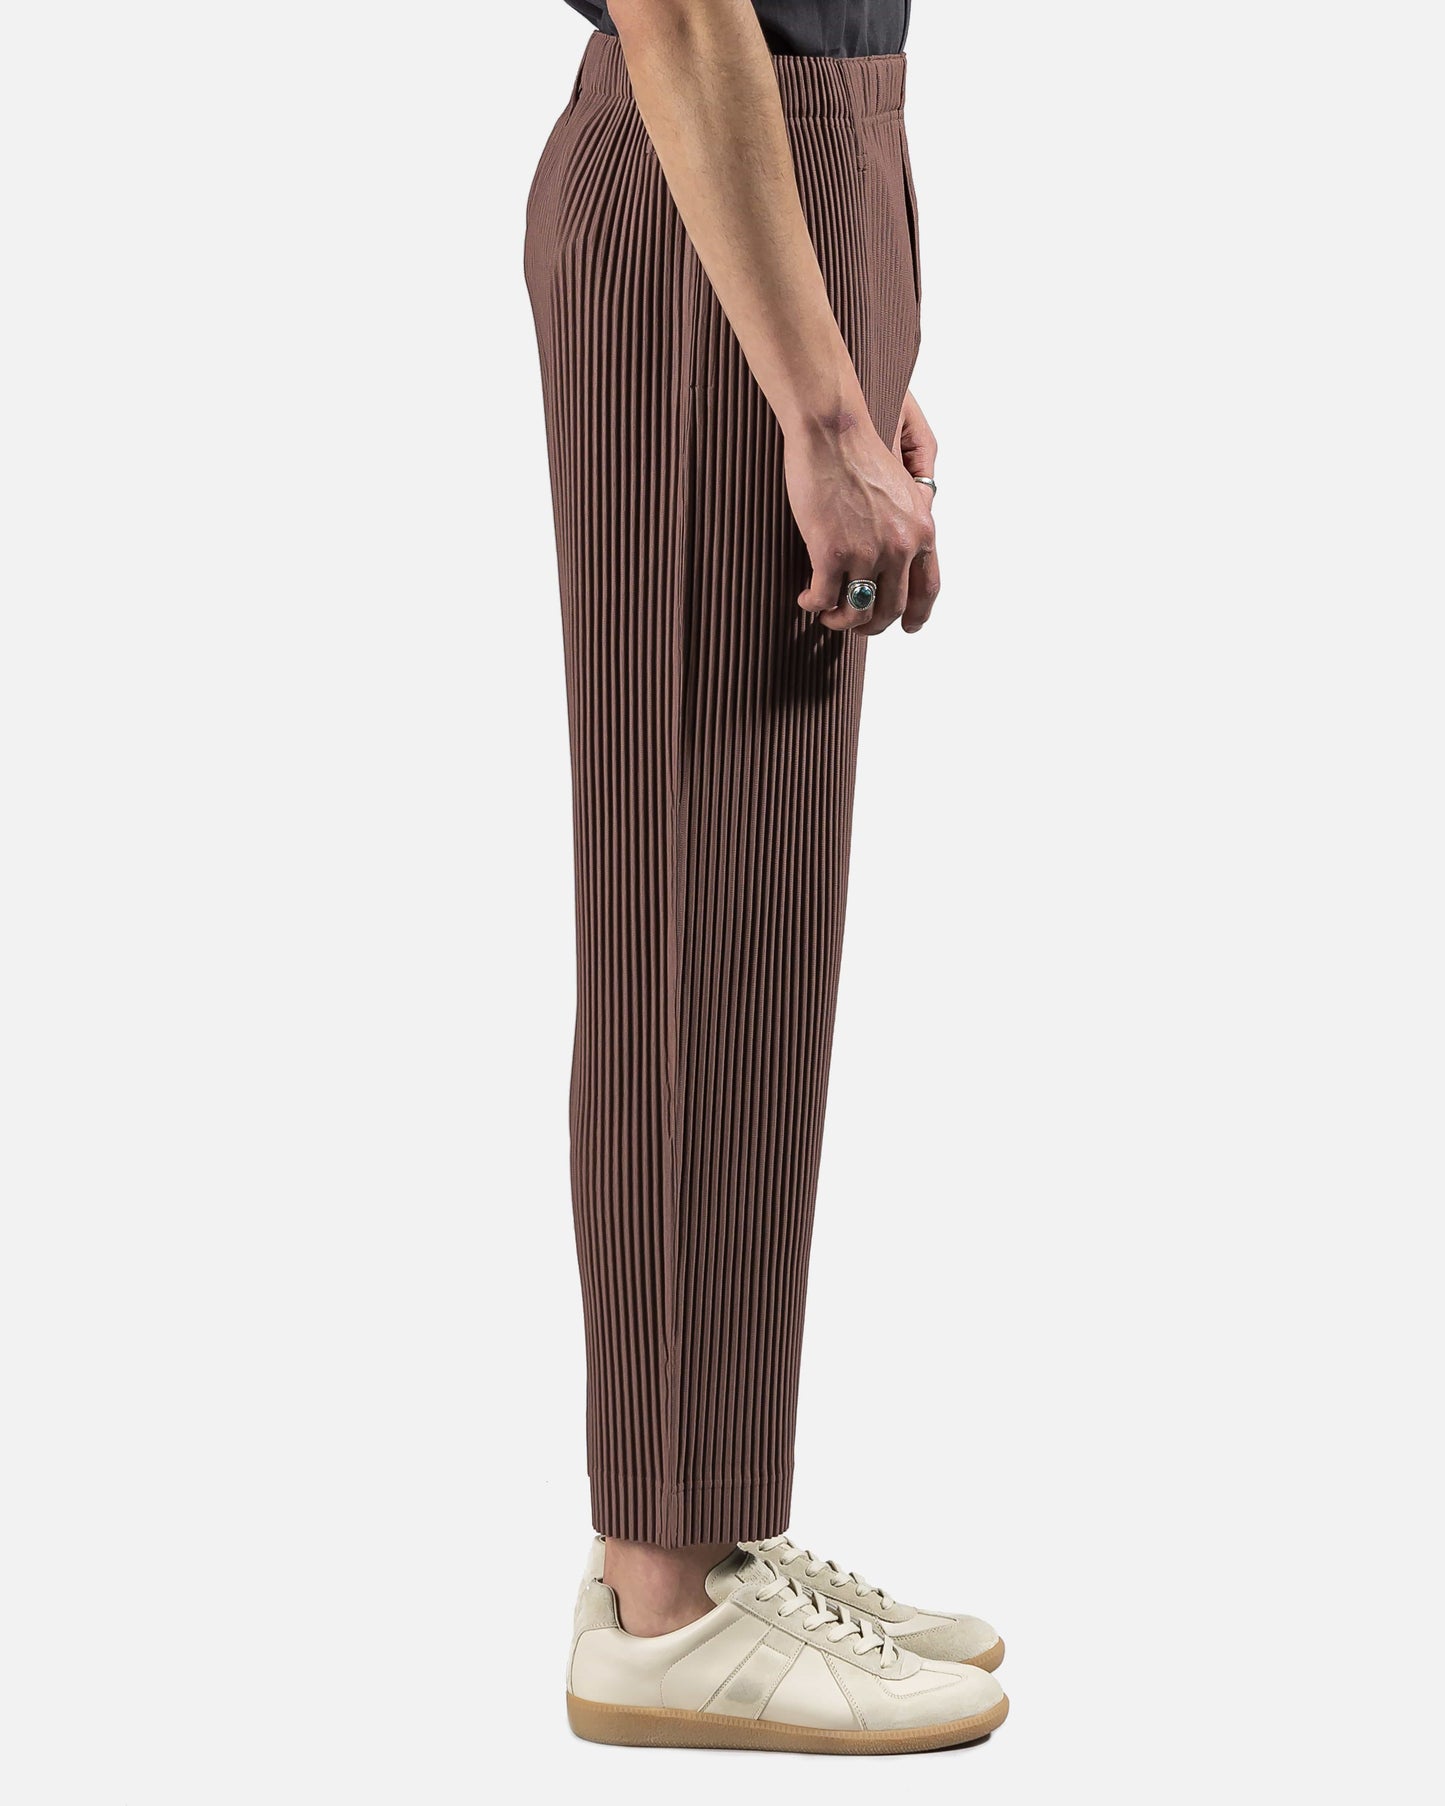 Homme Plissé Issey Miyake Men's Pants Tailored Straight Pleated Trousers in Brown